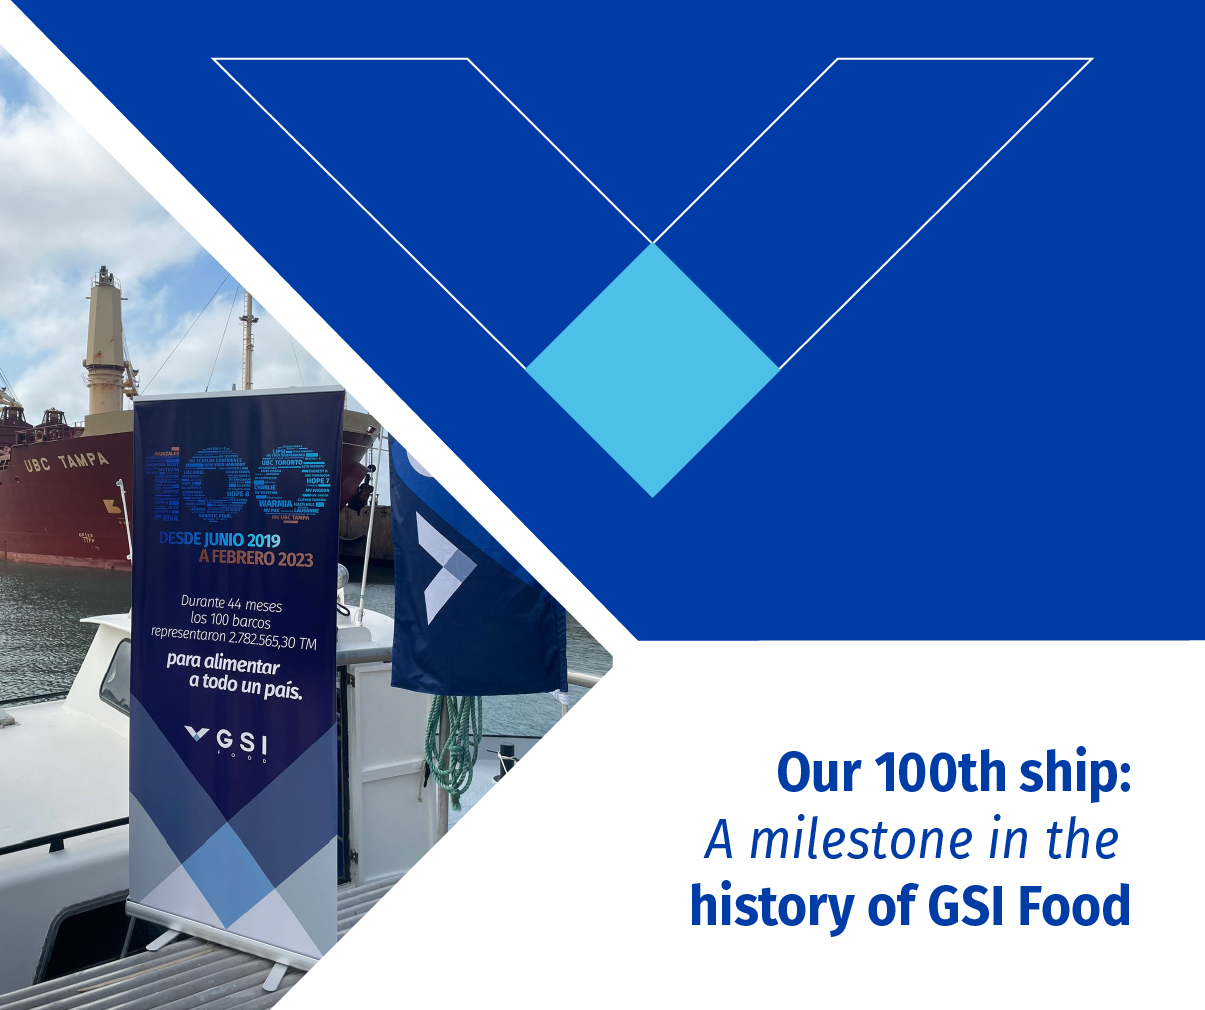 You are currently viewing Our 100th ship: A milestone in the history of GSI Food